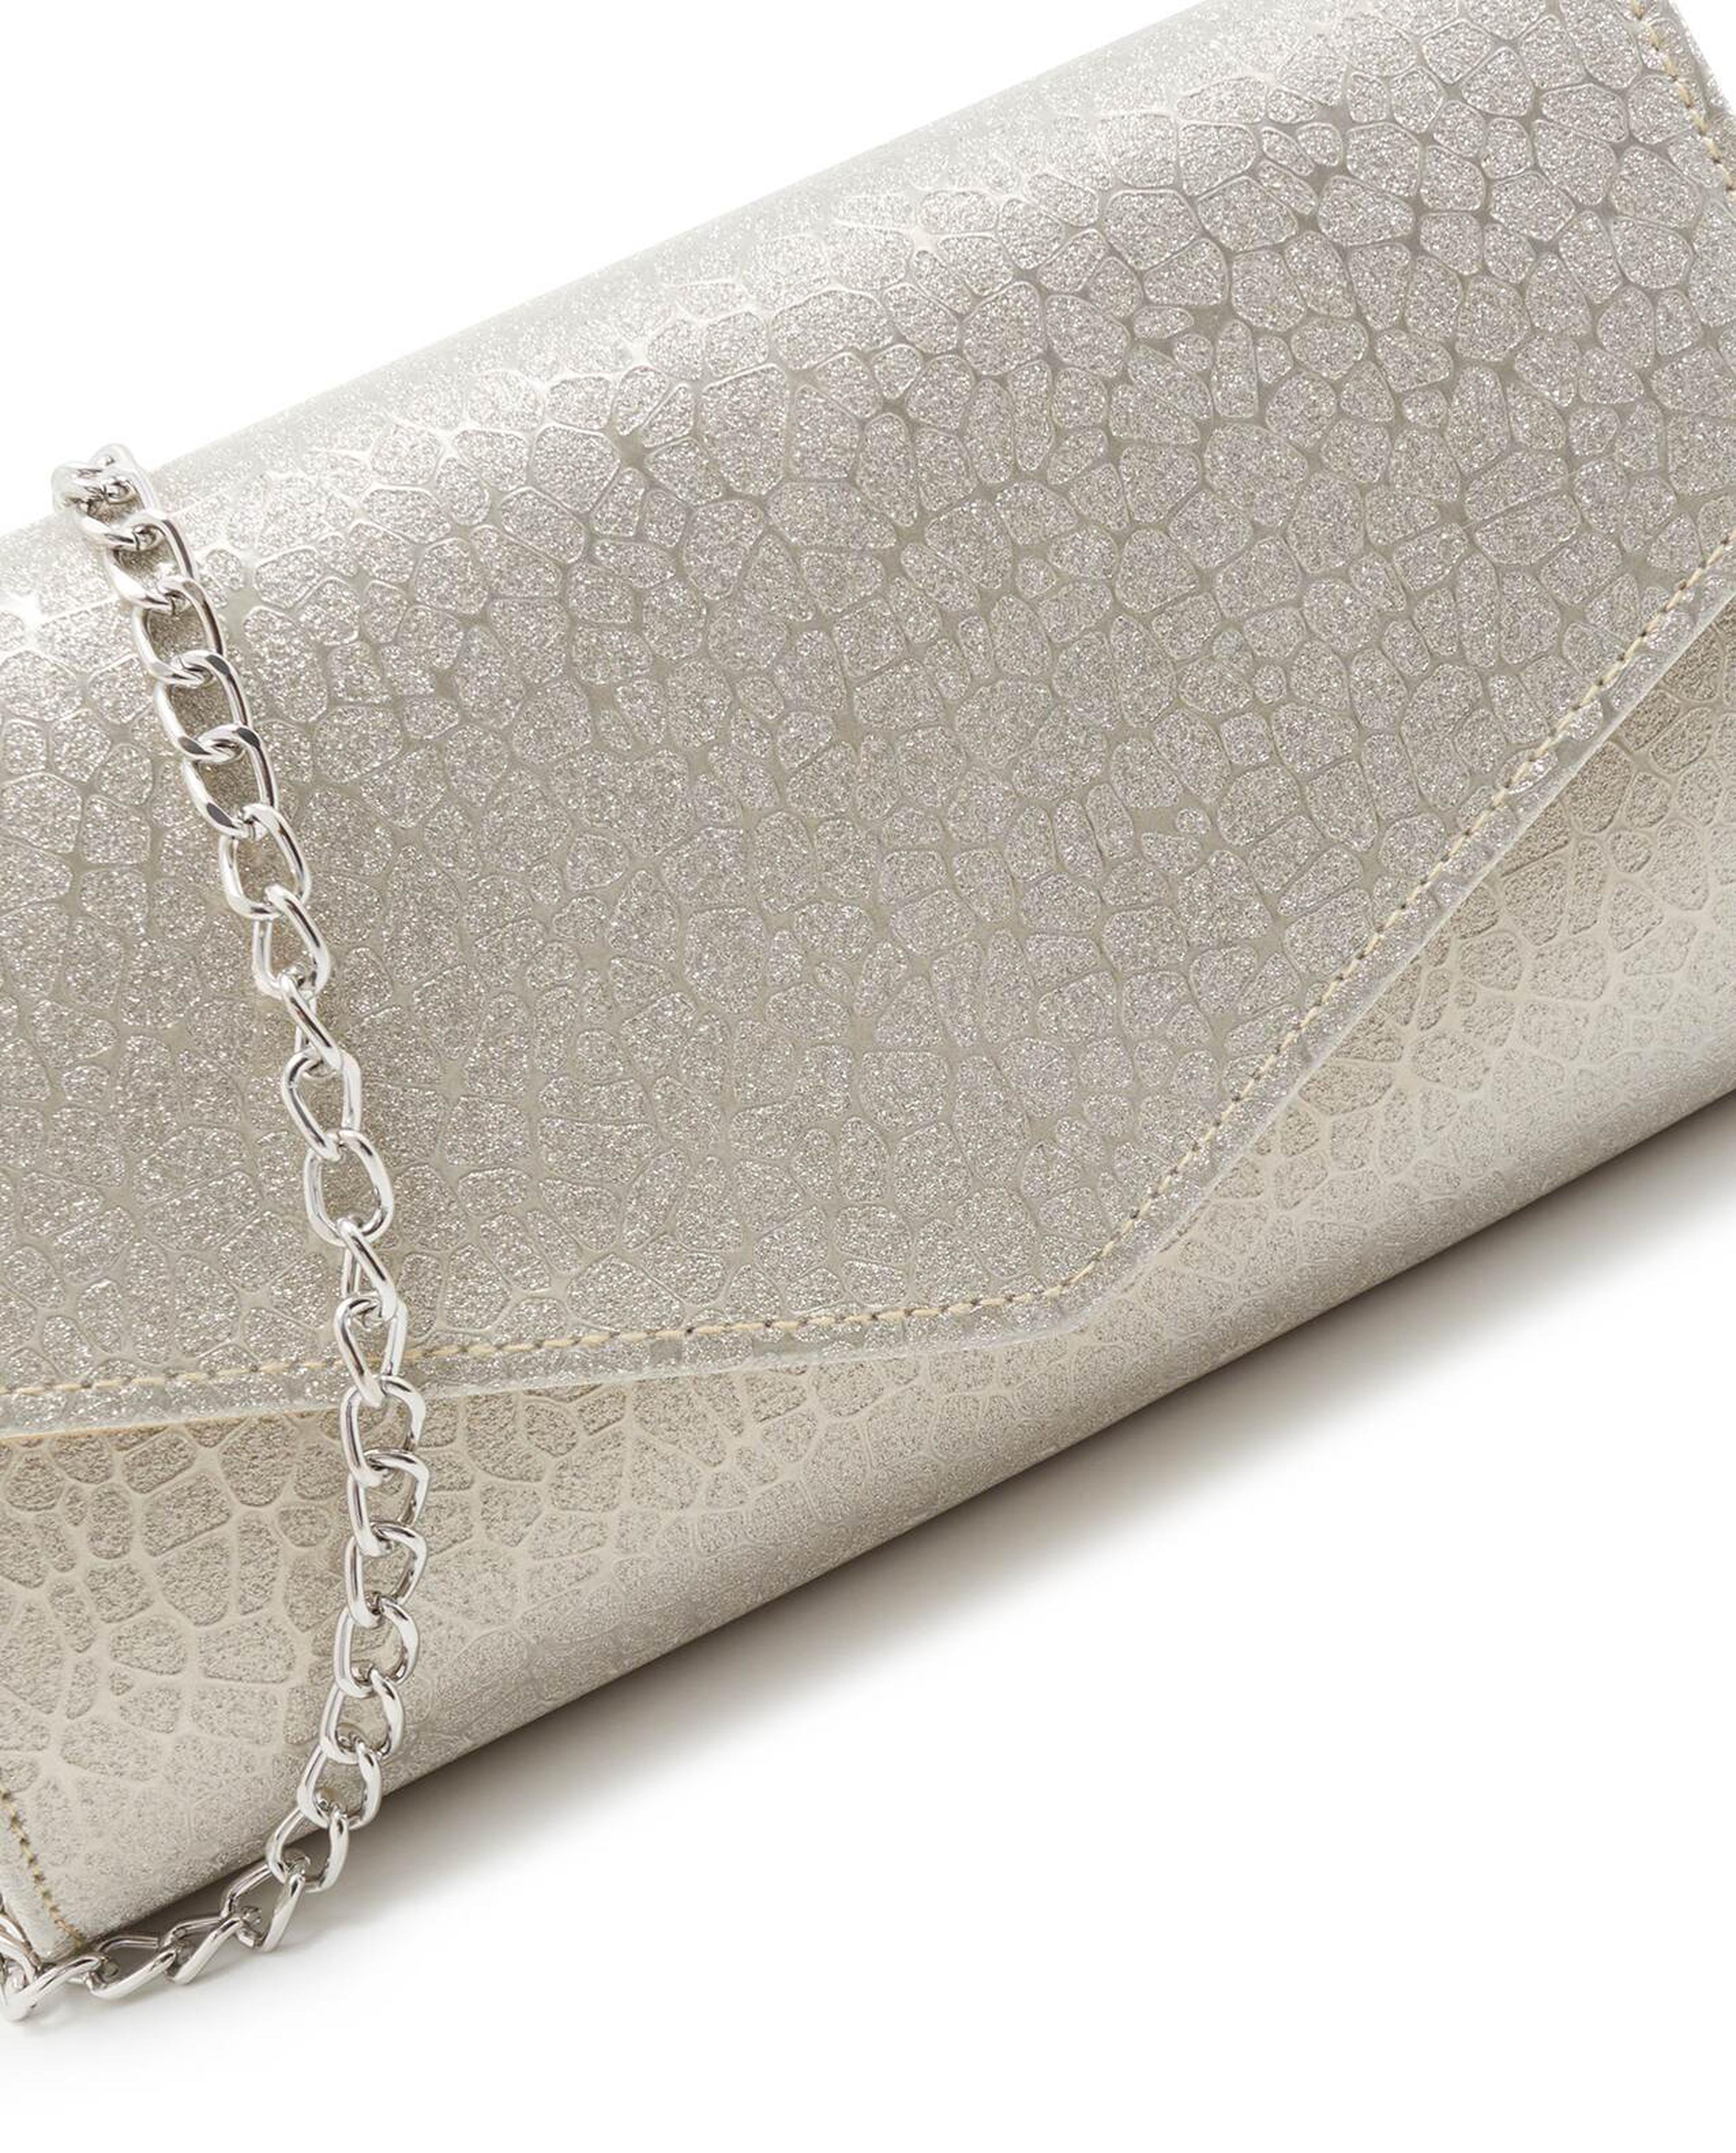 Textured Envelop Clutch with Sling